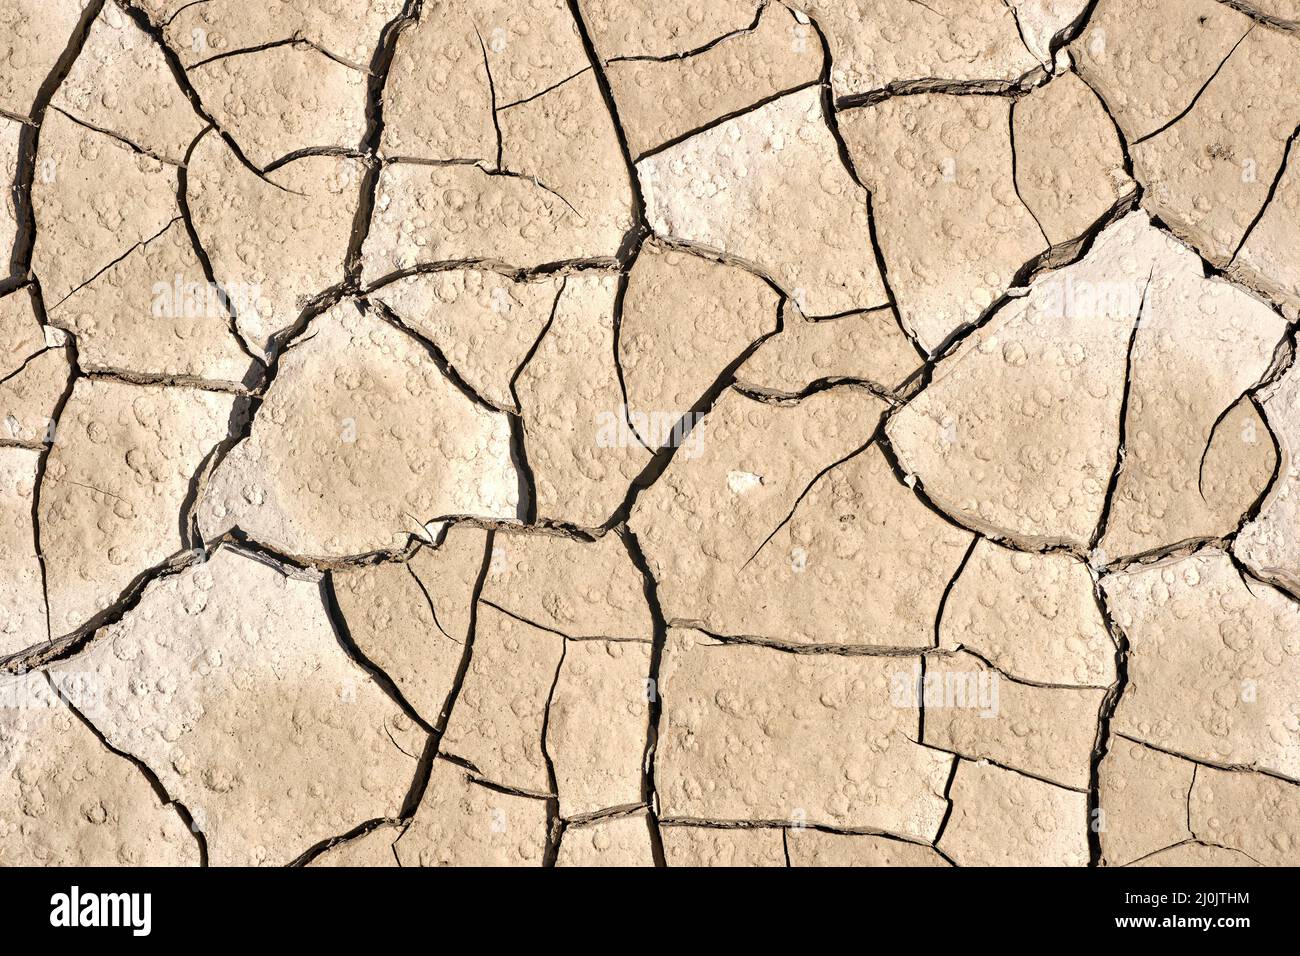 Background from beige cracked soil Stock Photo